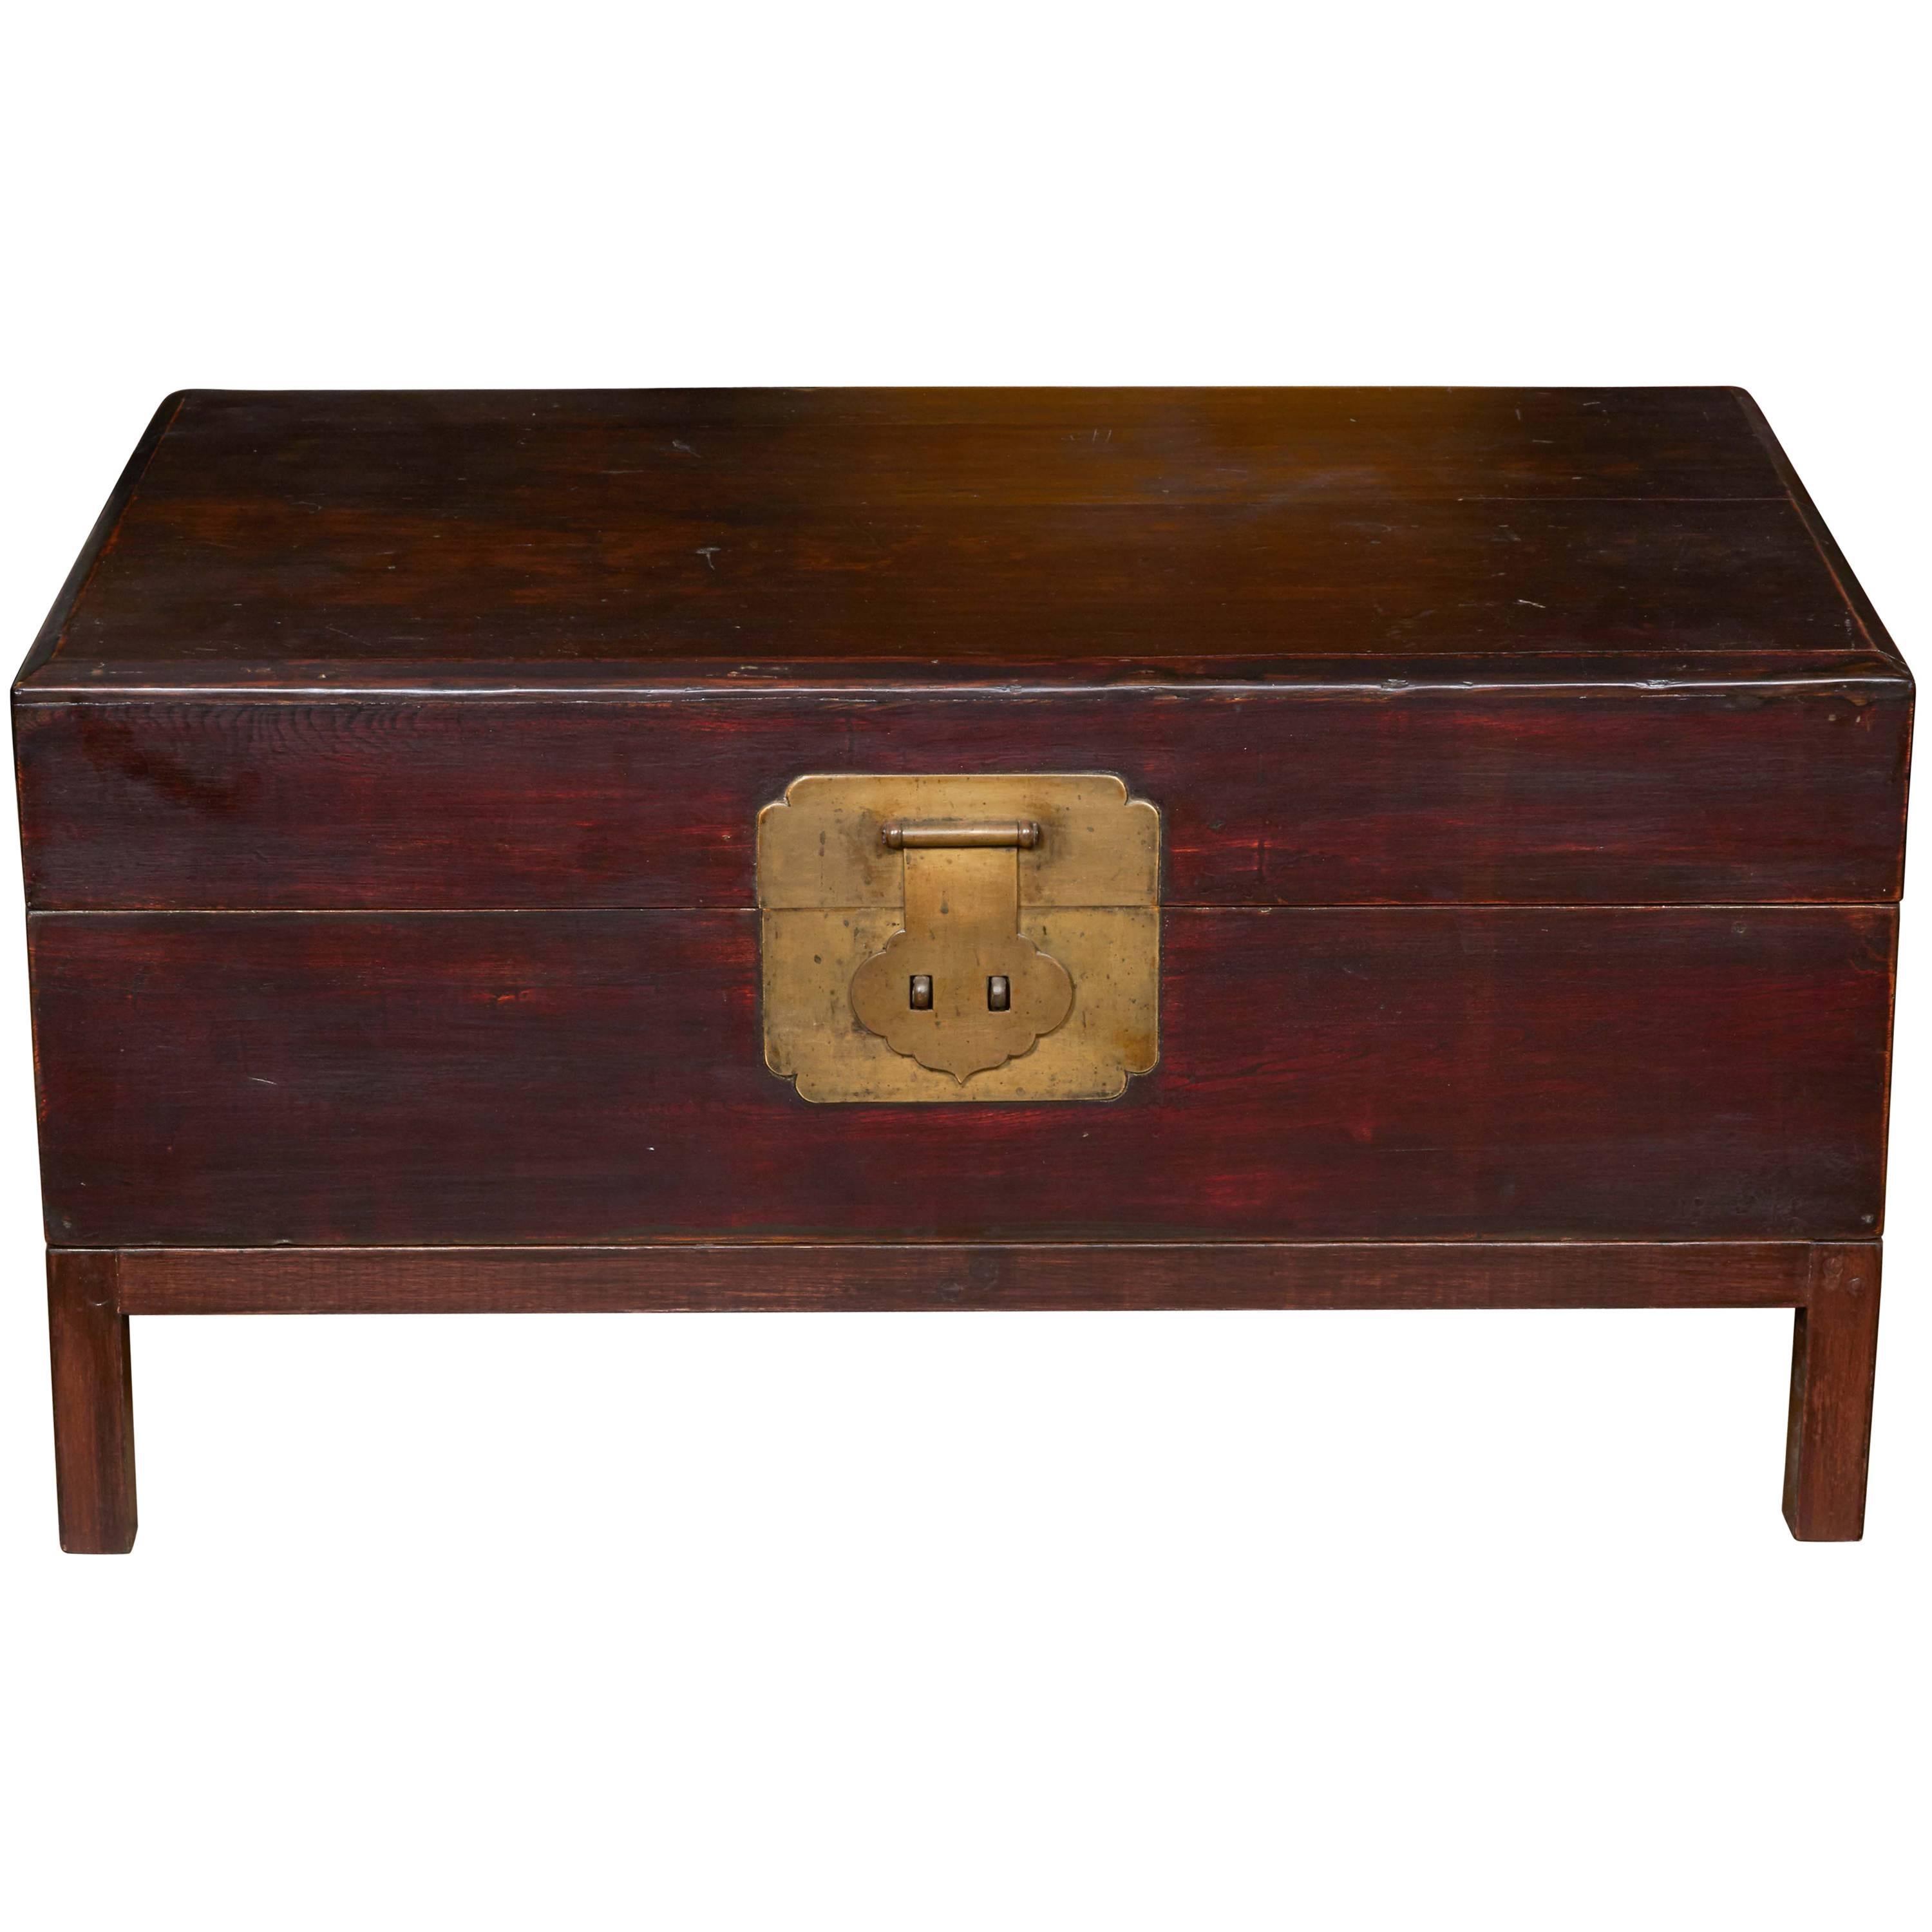 Mid-19th Century Peachwood Trunk on Stand, brown lacquered, Shanghai